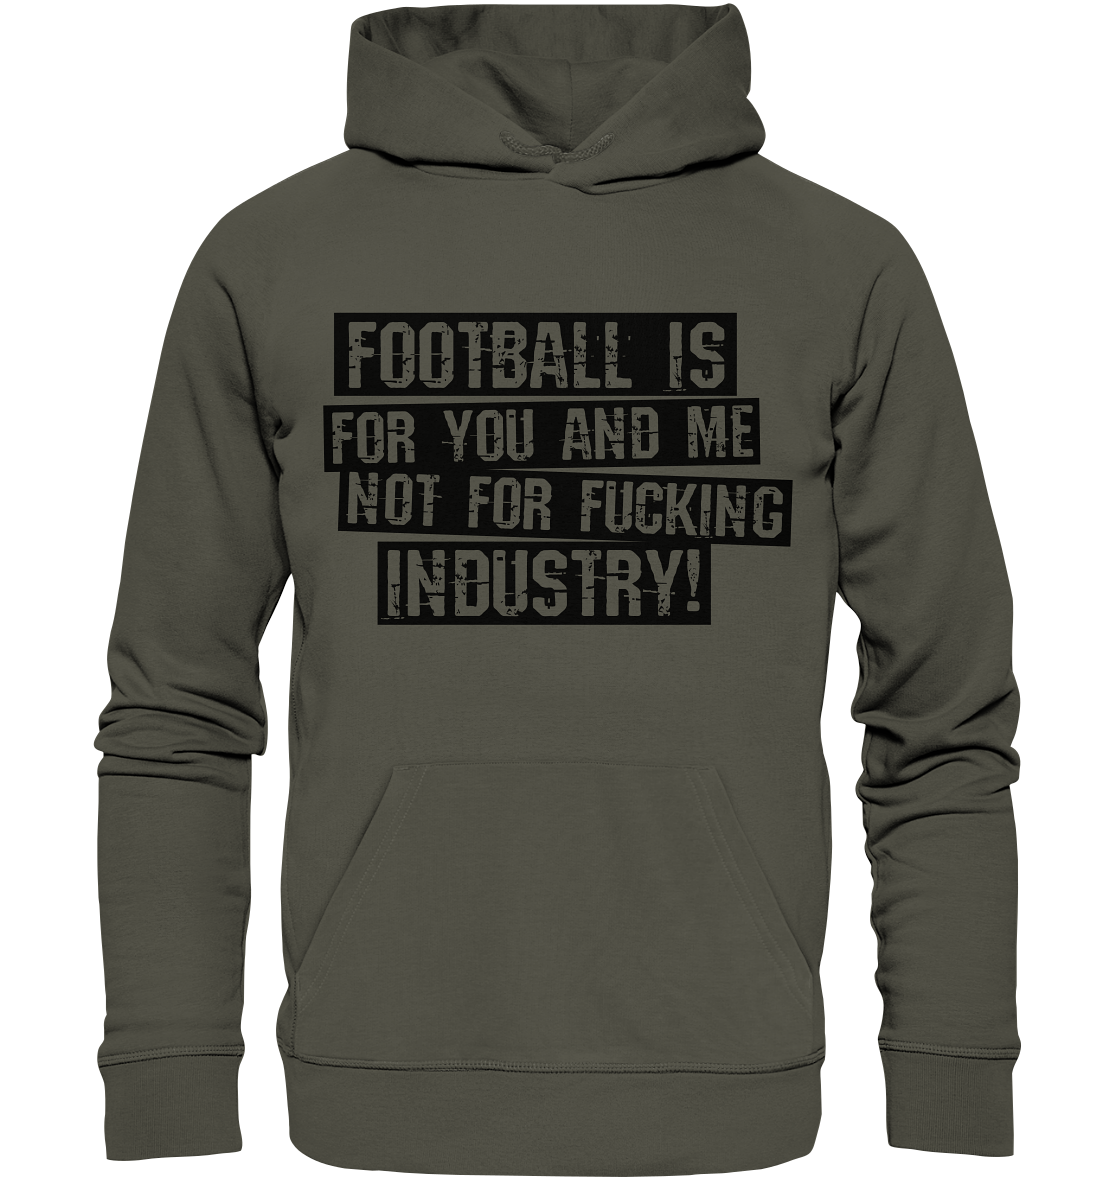 BLOCK.FC Fanblock Hoodie "FOOTBALL IS FOR YOU AND ME NOT FOR FUCKING INDUSTRY!" Männer Organic Basic Kapuzenpullover khaki